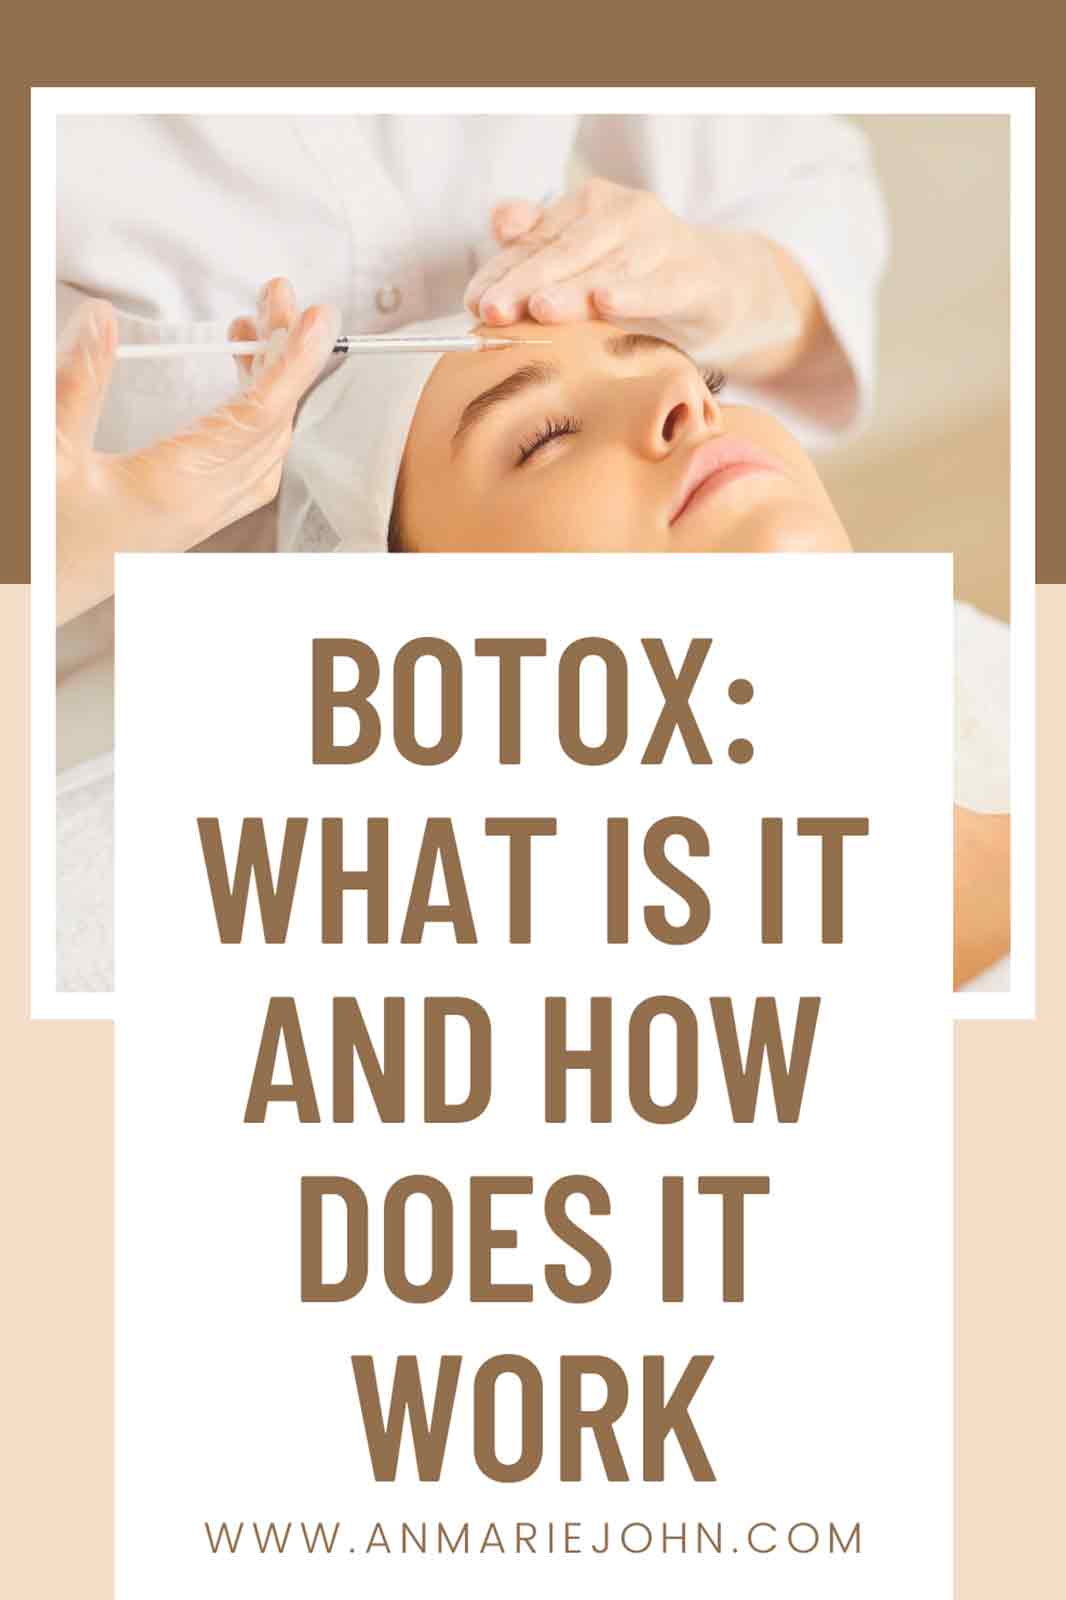 How Does Botox Work